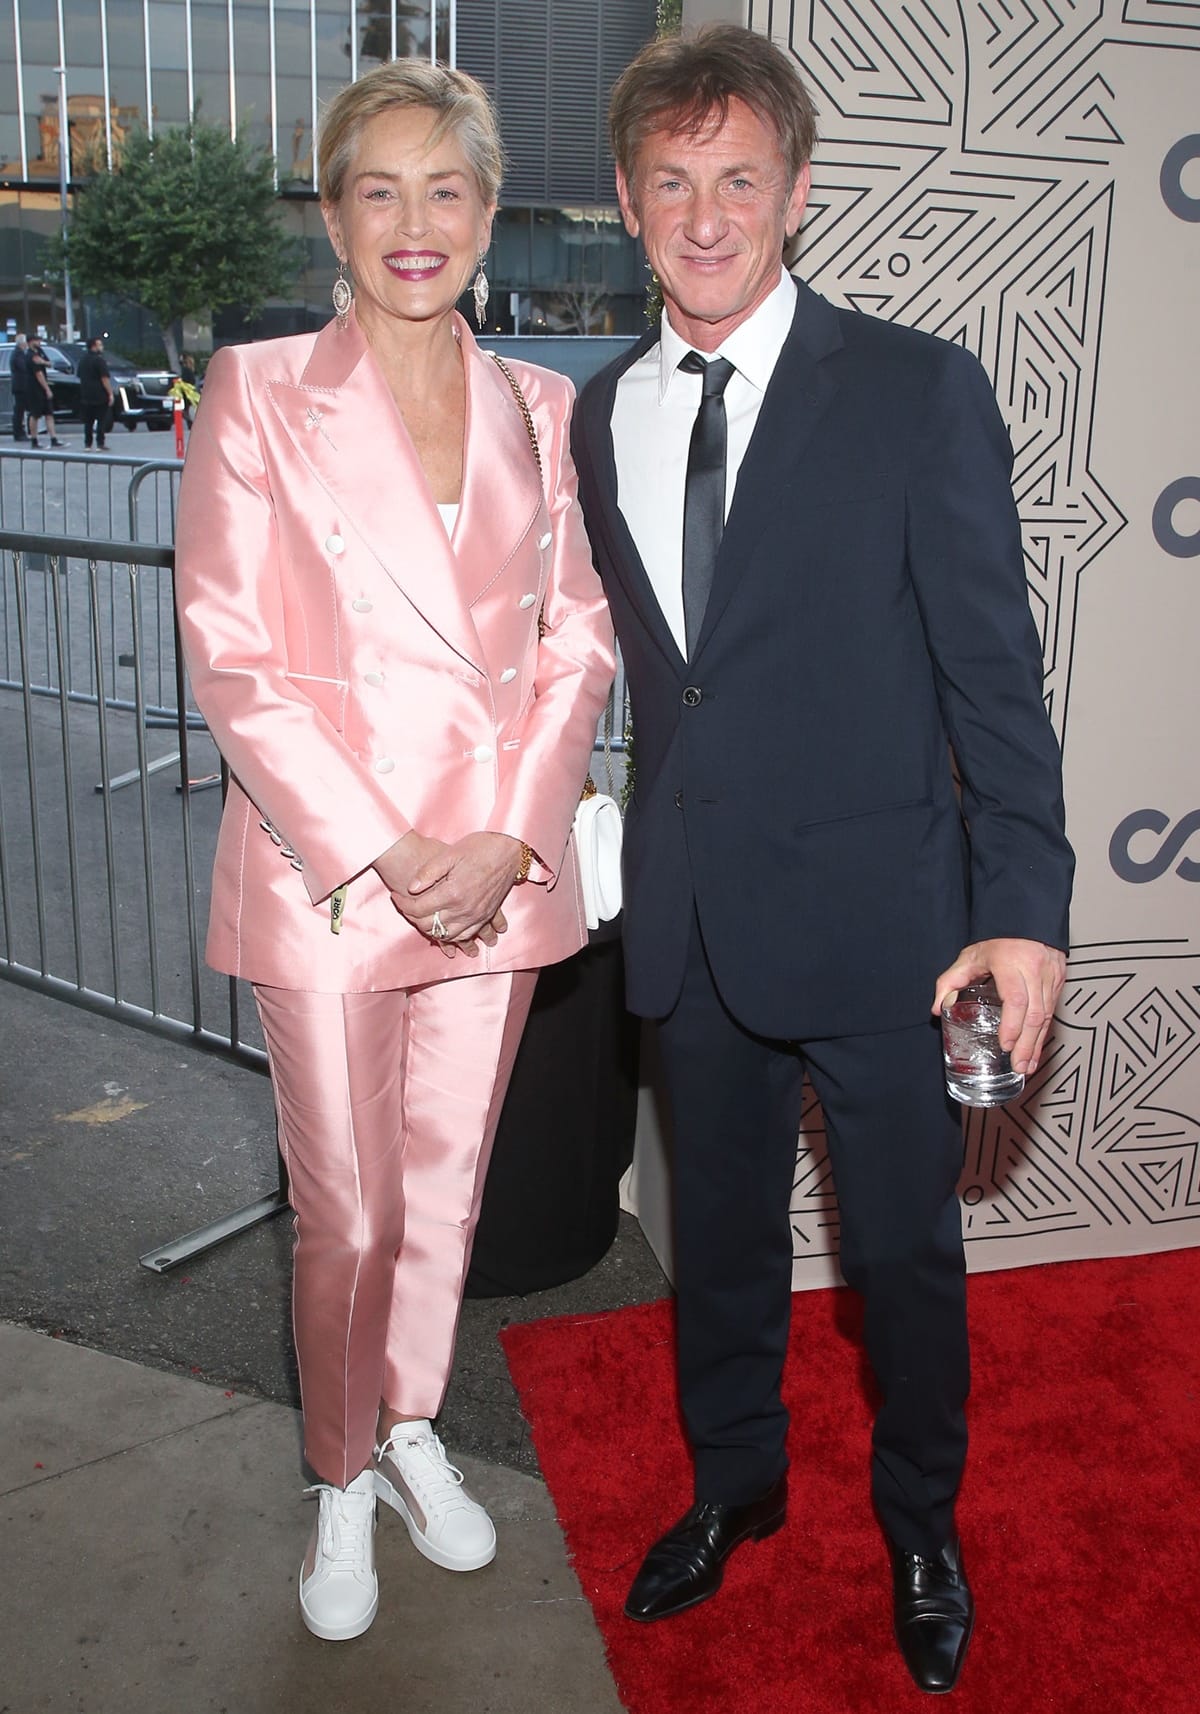 Sharon Stone, wearing a pink satin pantsuit and Dolce & Gabbana sneakers, joined Sean Penn at the 2022 CORE Gala